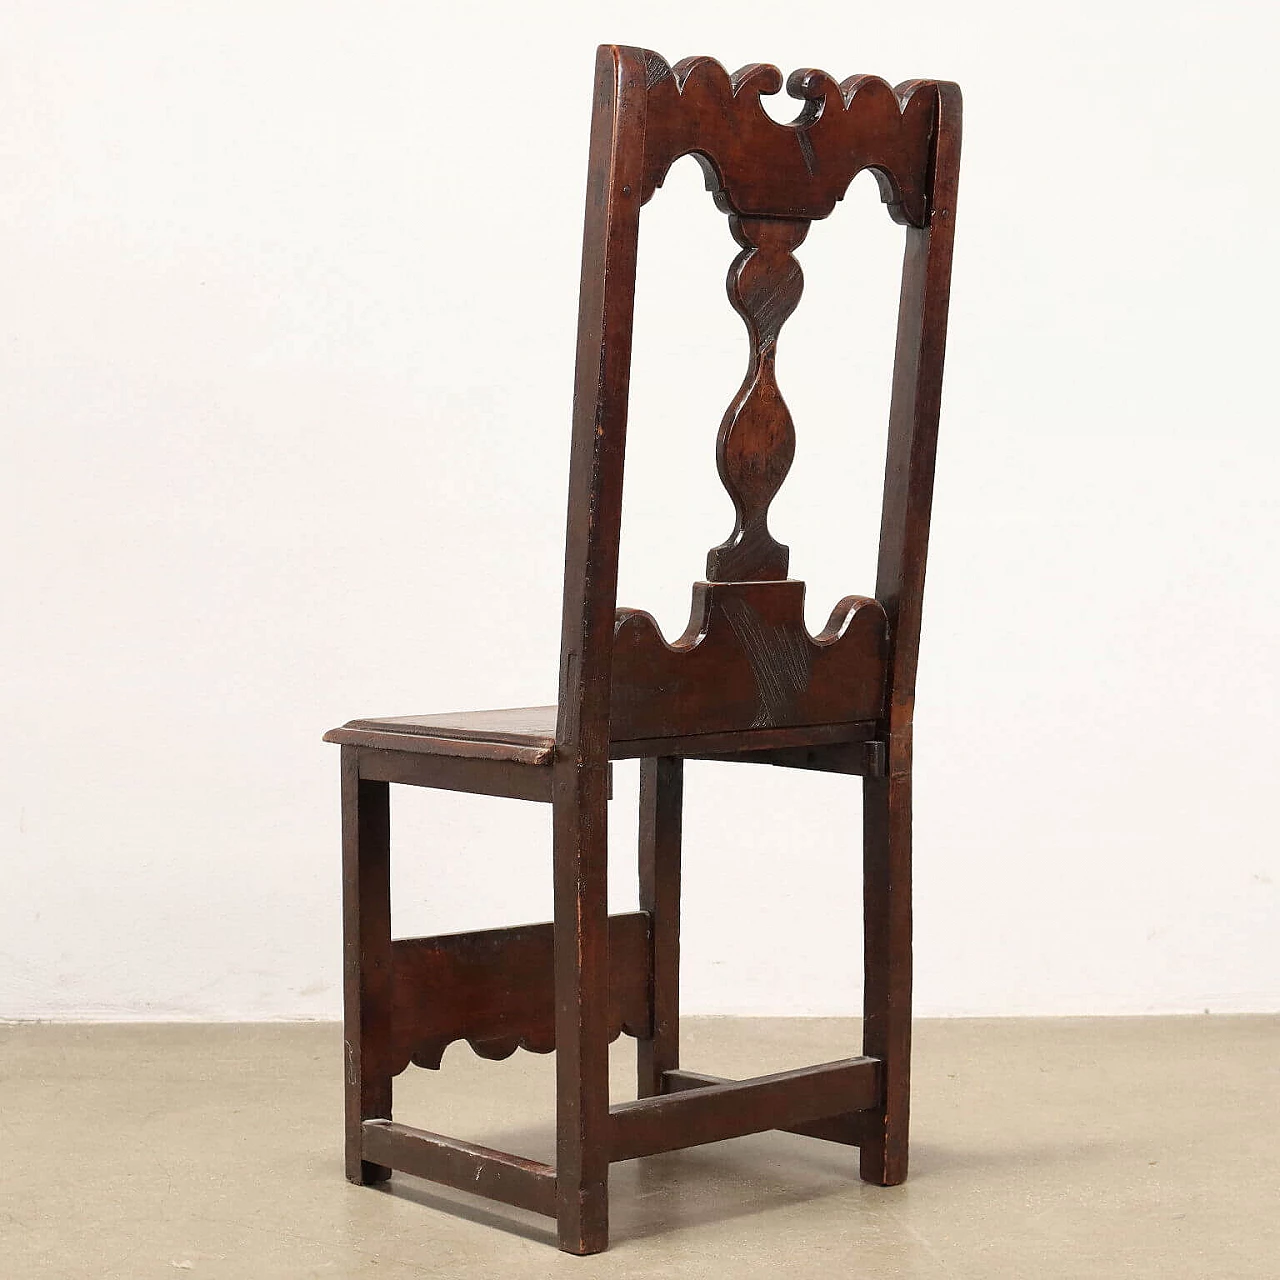 6 Neo-Renaissance beech and chestnut chairs, late 19th century 8